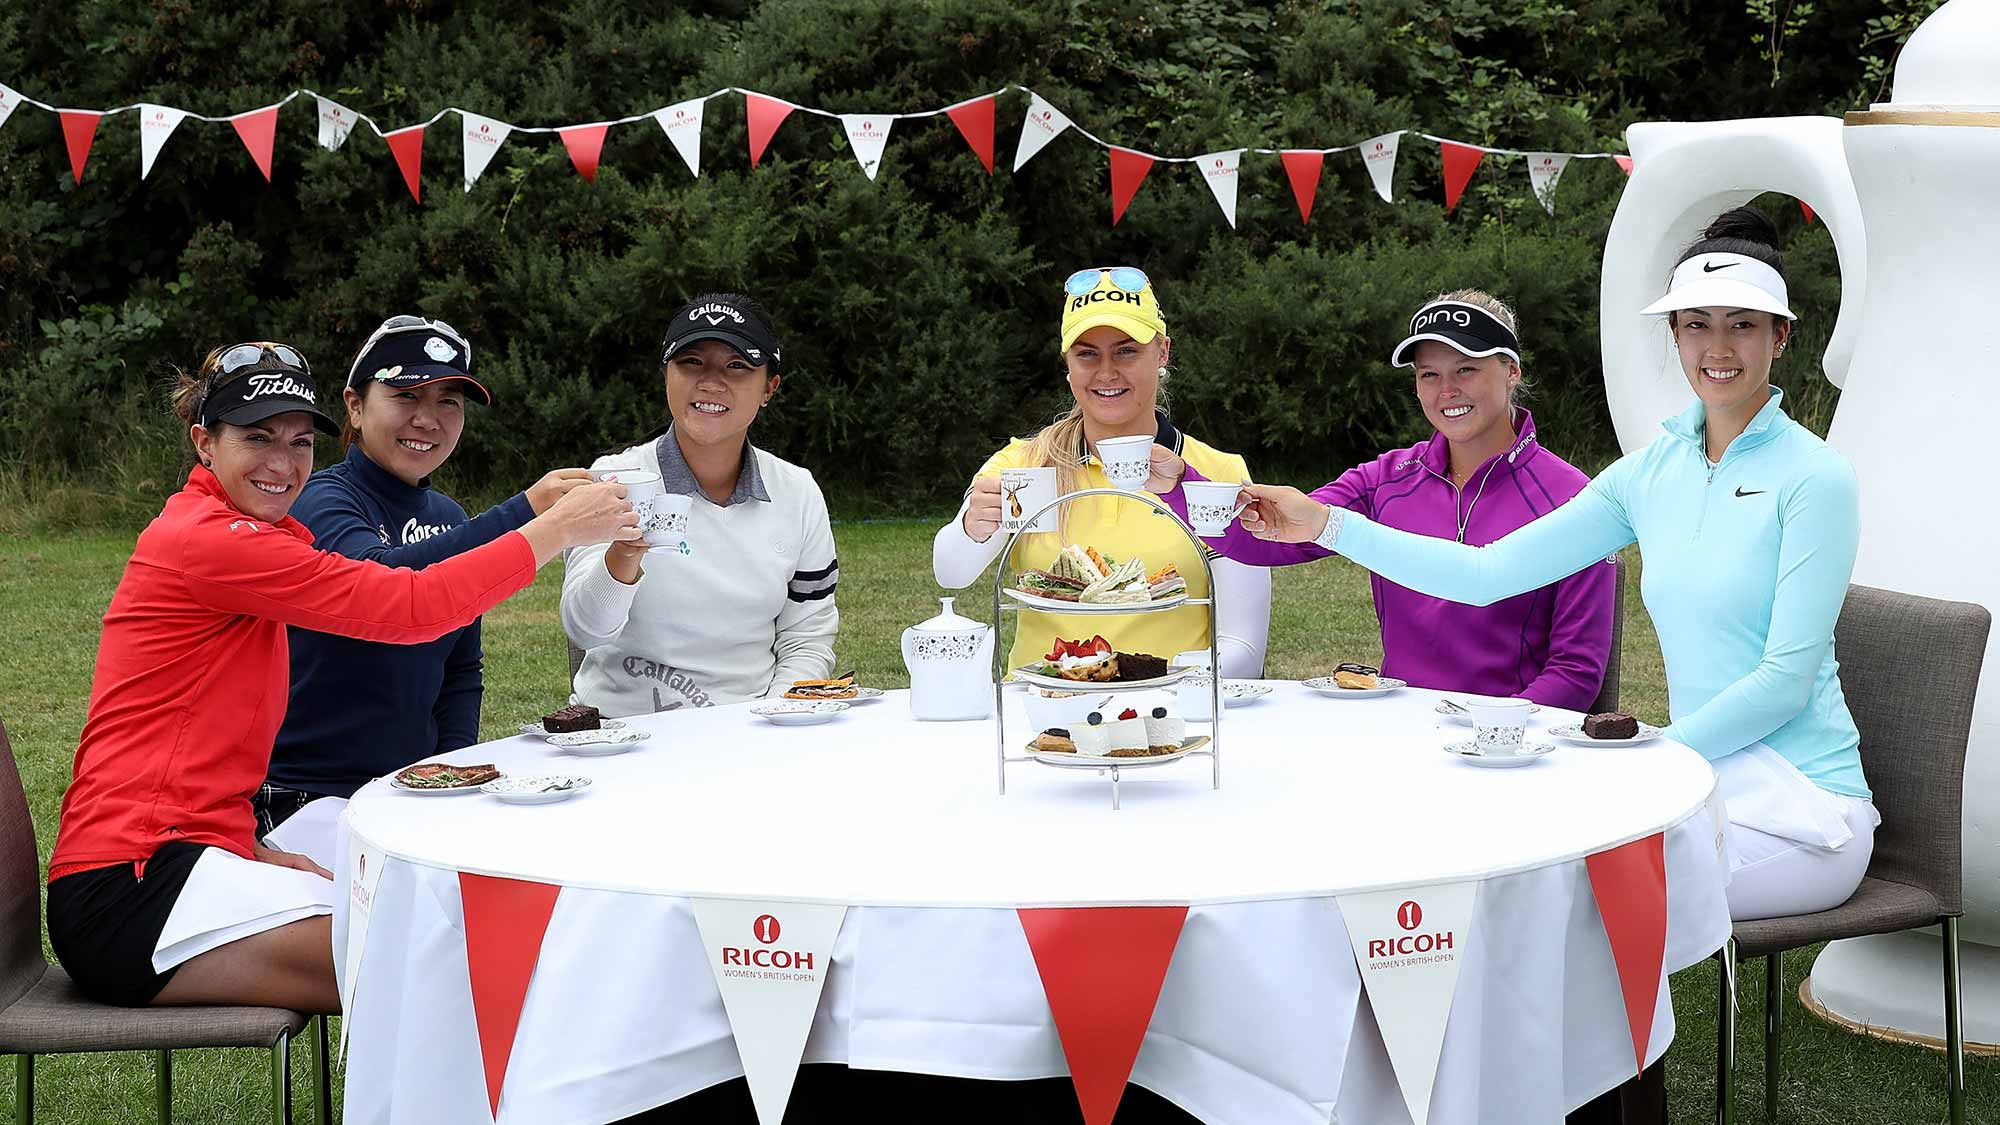 Charley Hull of England hosts a traditional English tea party for her fellow golfers at a photocall held at her home club, Woburn GC, (L-R) Brittany Lang of the United States, Mika Miyazato of Japan, Lydia Ko of New Zealand, Charley Hull of England, Brooke Henderson of Canada and Michelle Wie of the United States, during a Pro-Am round ahead of the Ricoh Women's British Open